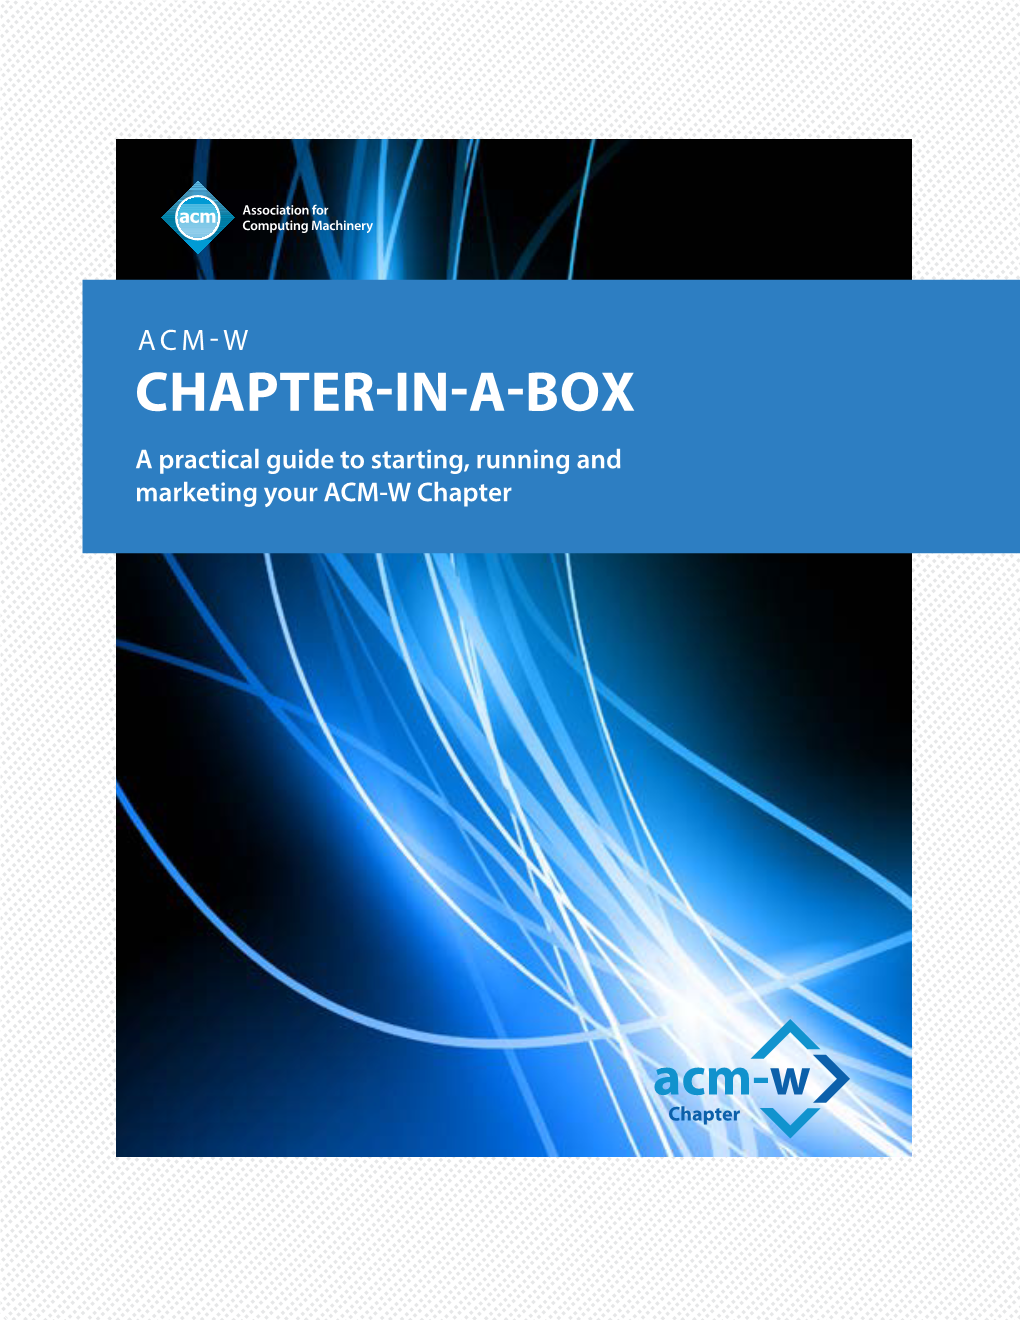 ACM-W CHAPTER-IN-A-BOX a Practical Guide to Starting, Running and Marketing Your ACM-W Chapter ACM-W CHAPTER-IN-A-BOX